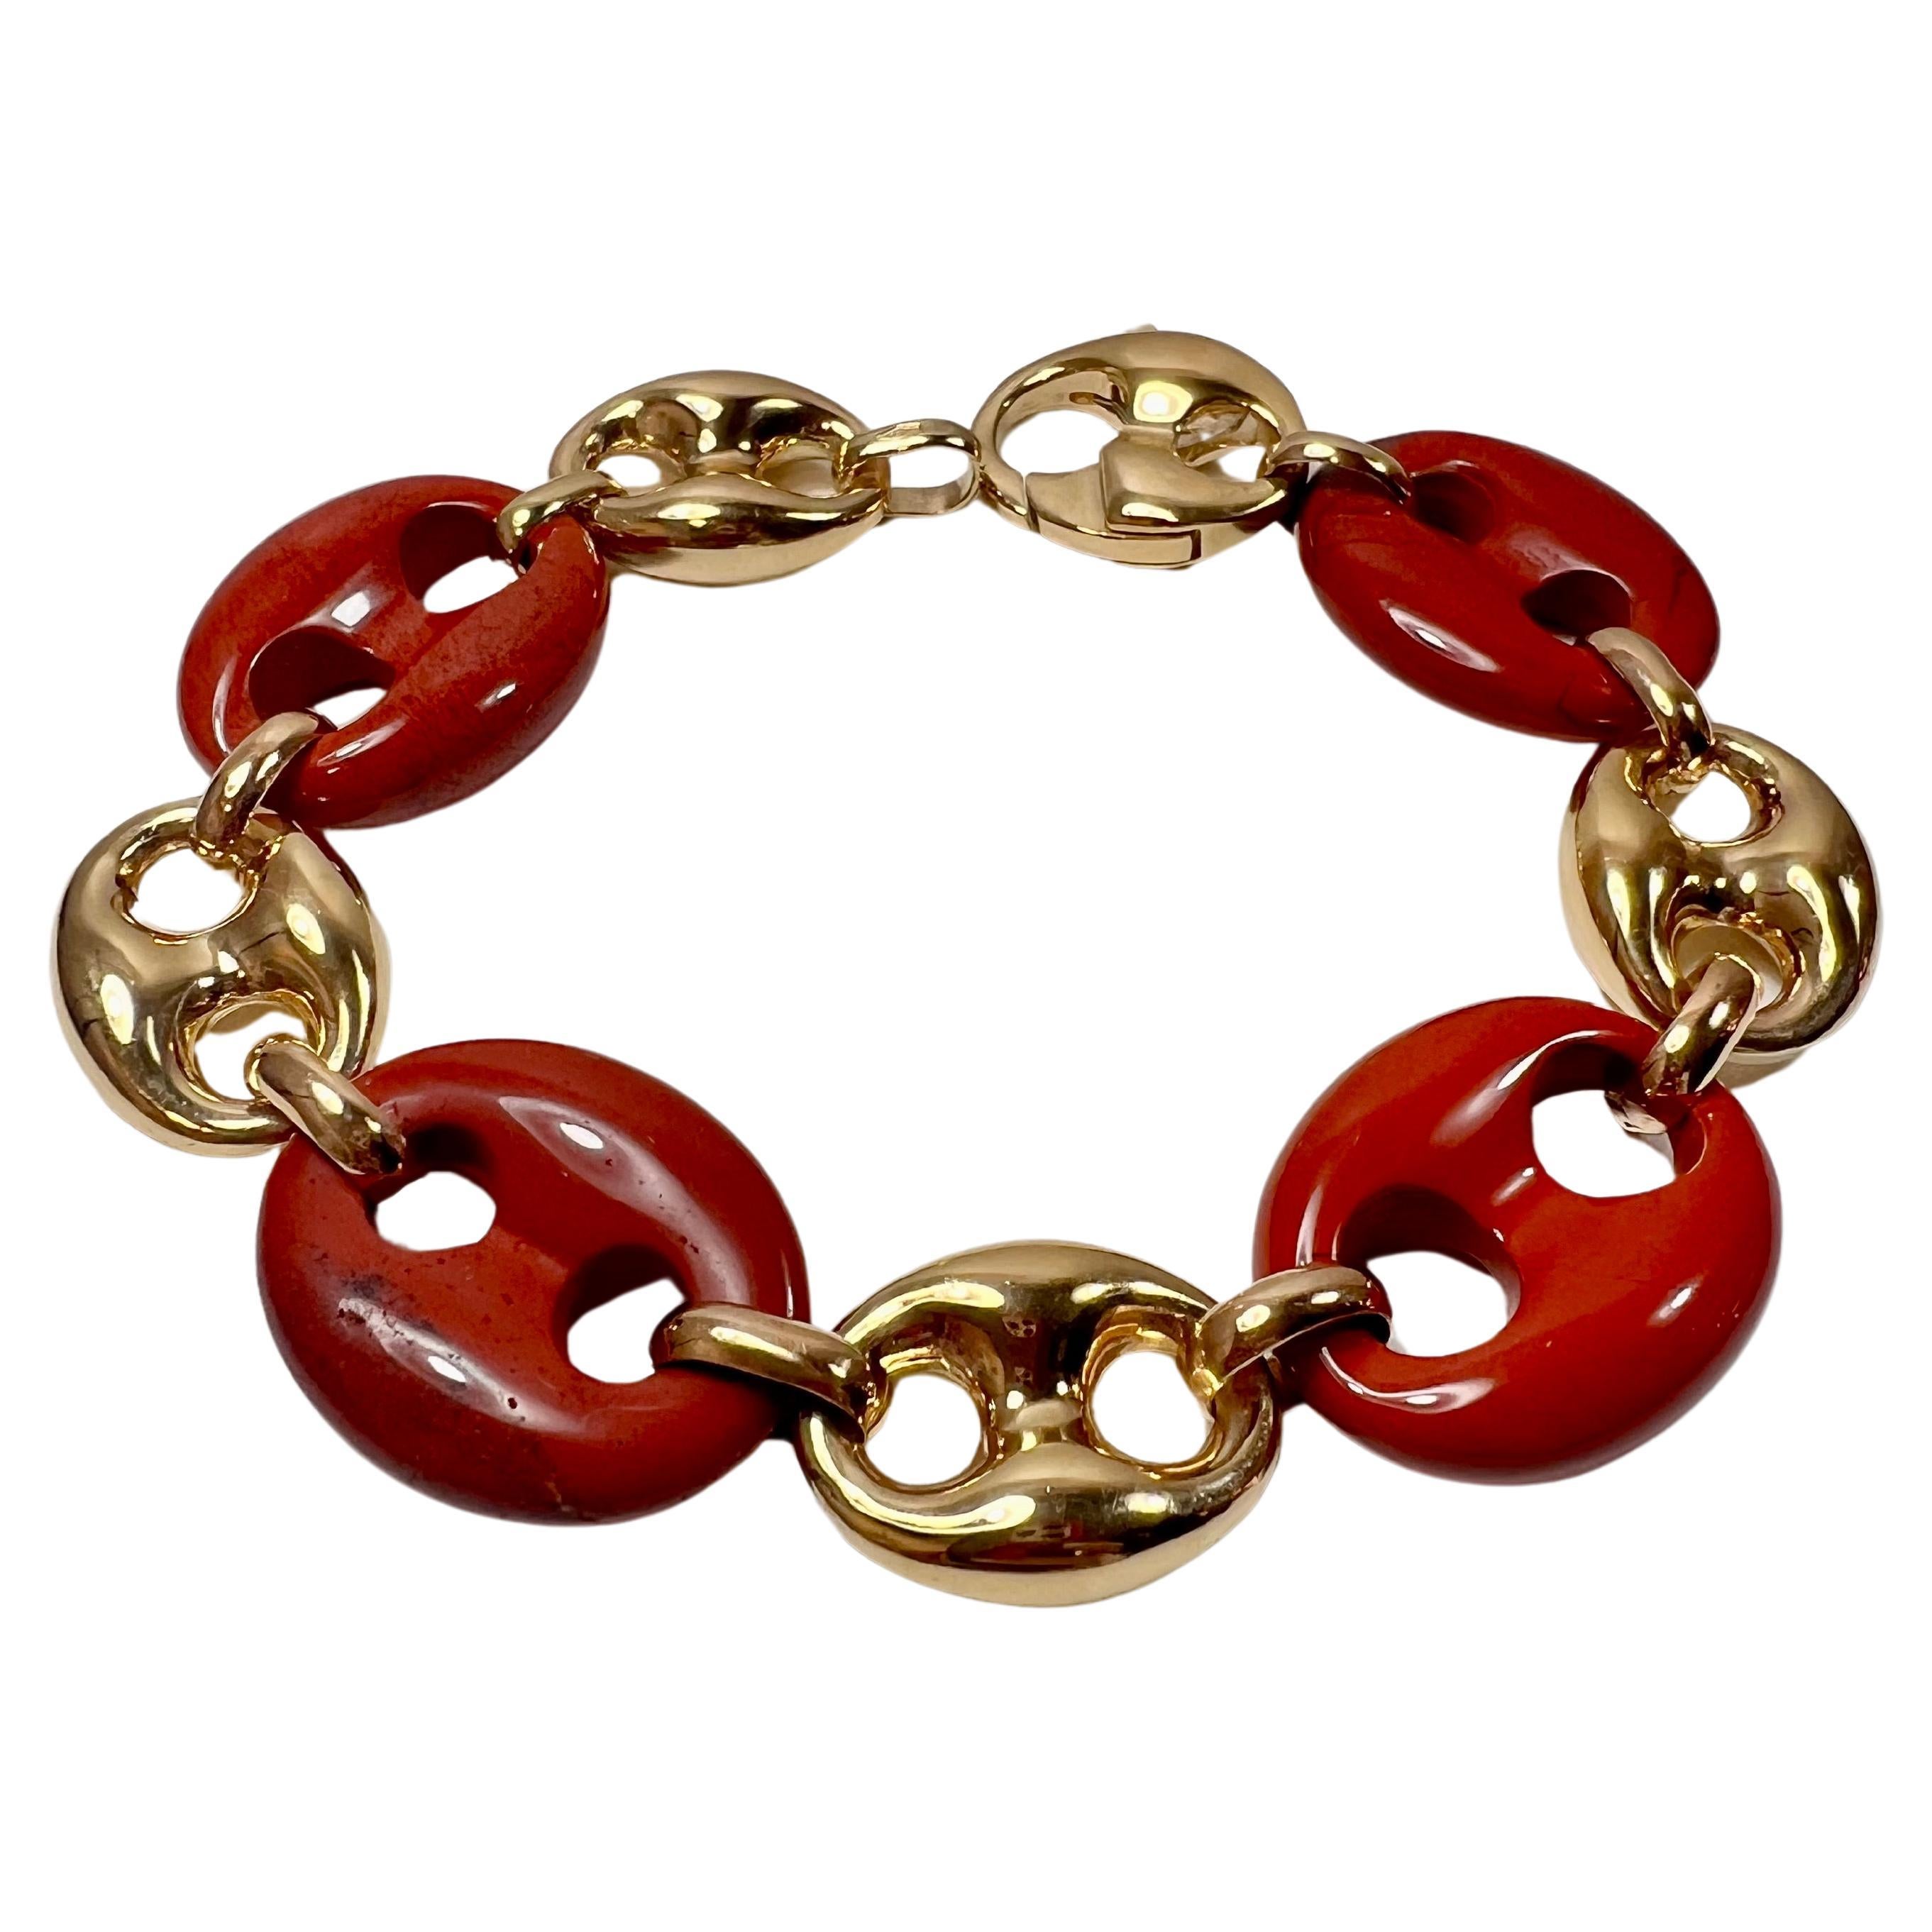 Iconic nautical, marine  chain symbolizes strength and sportive love for outdoor sports 
Solid Gold Finish for extra body and stregnth and Red Jasper for uniqueness and style
Options of many colour Jaspers, Cornelians and Crystals.. 
Beautiful,